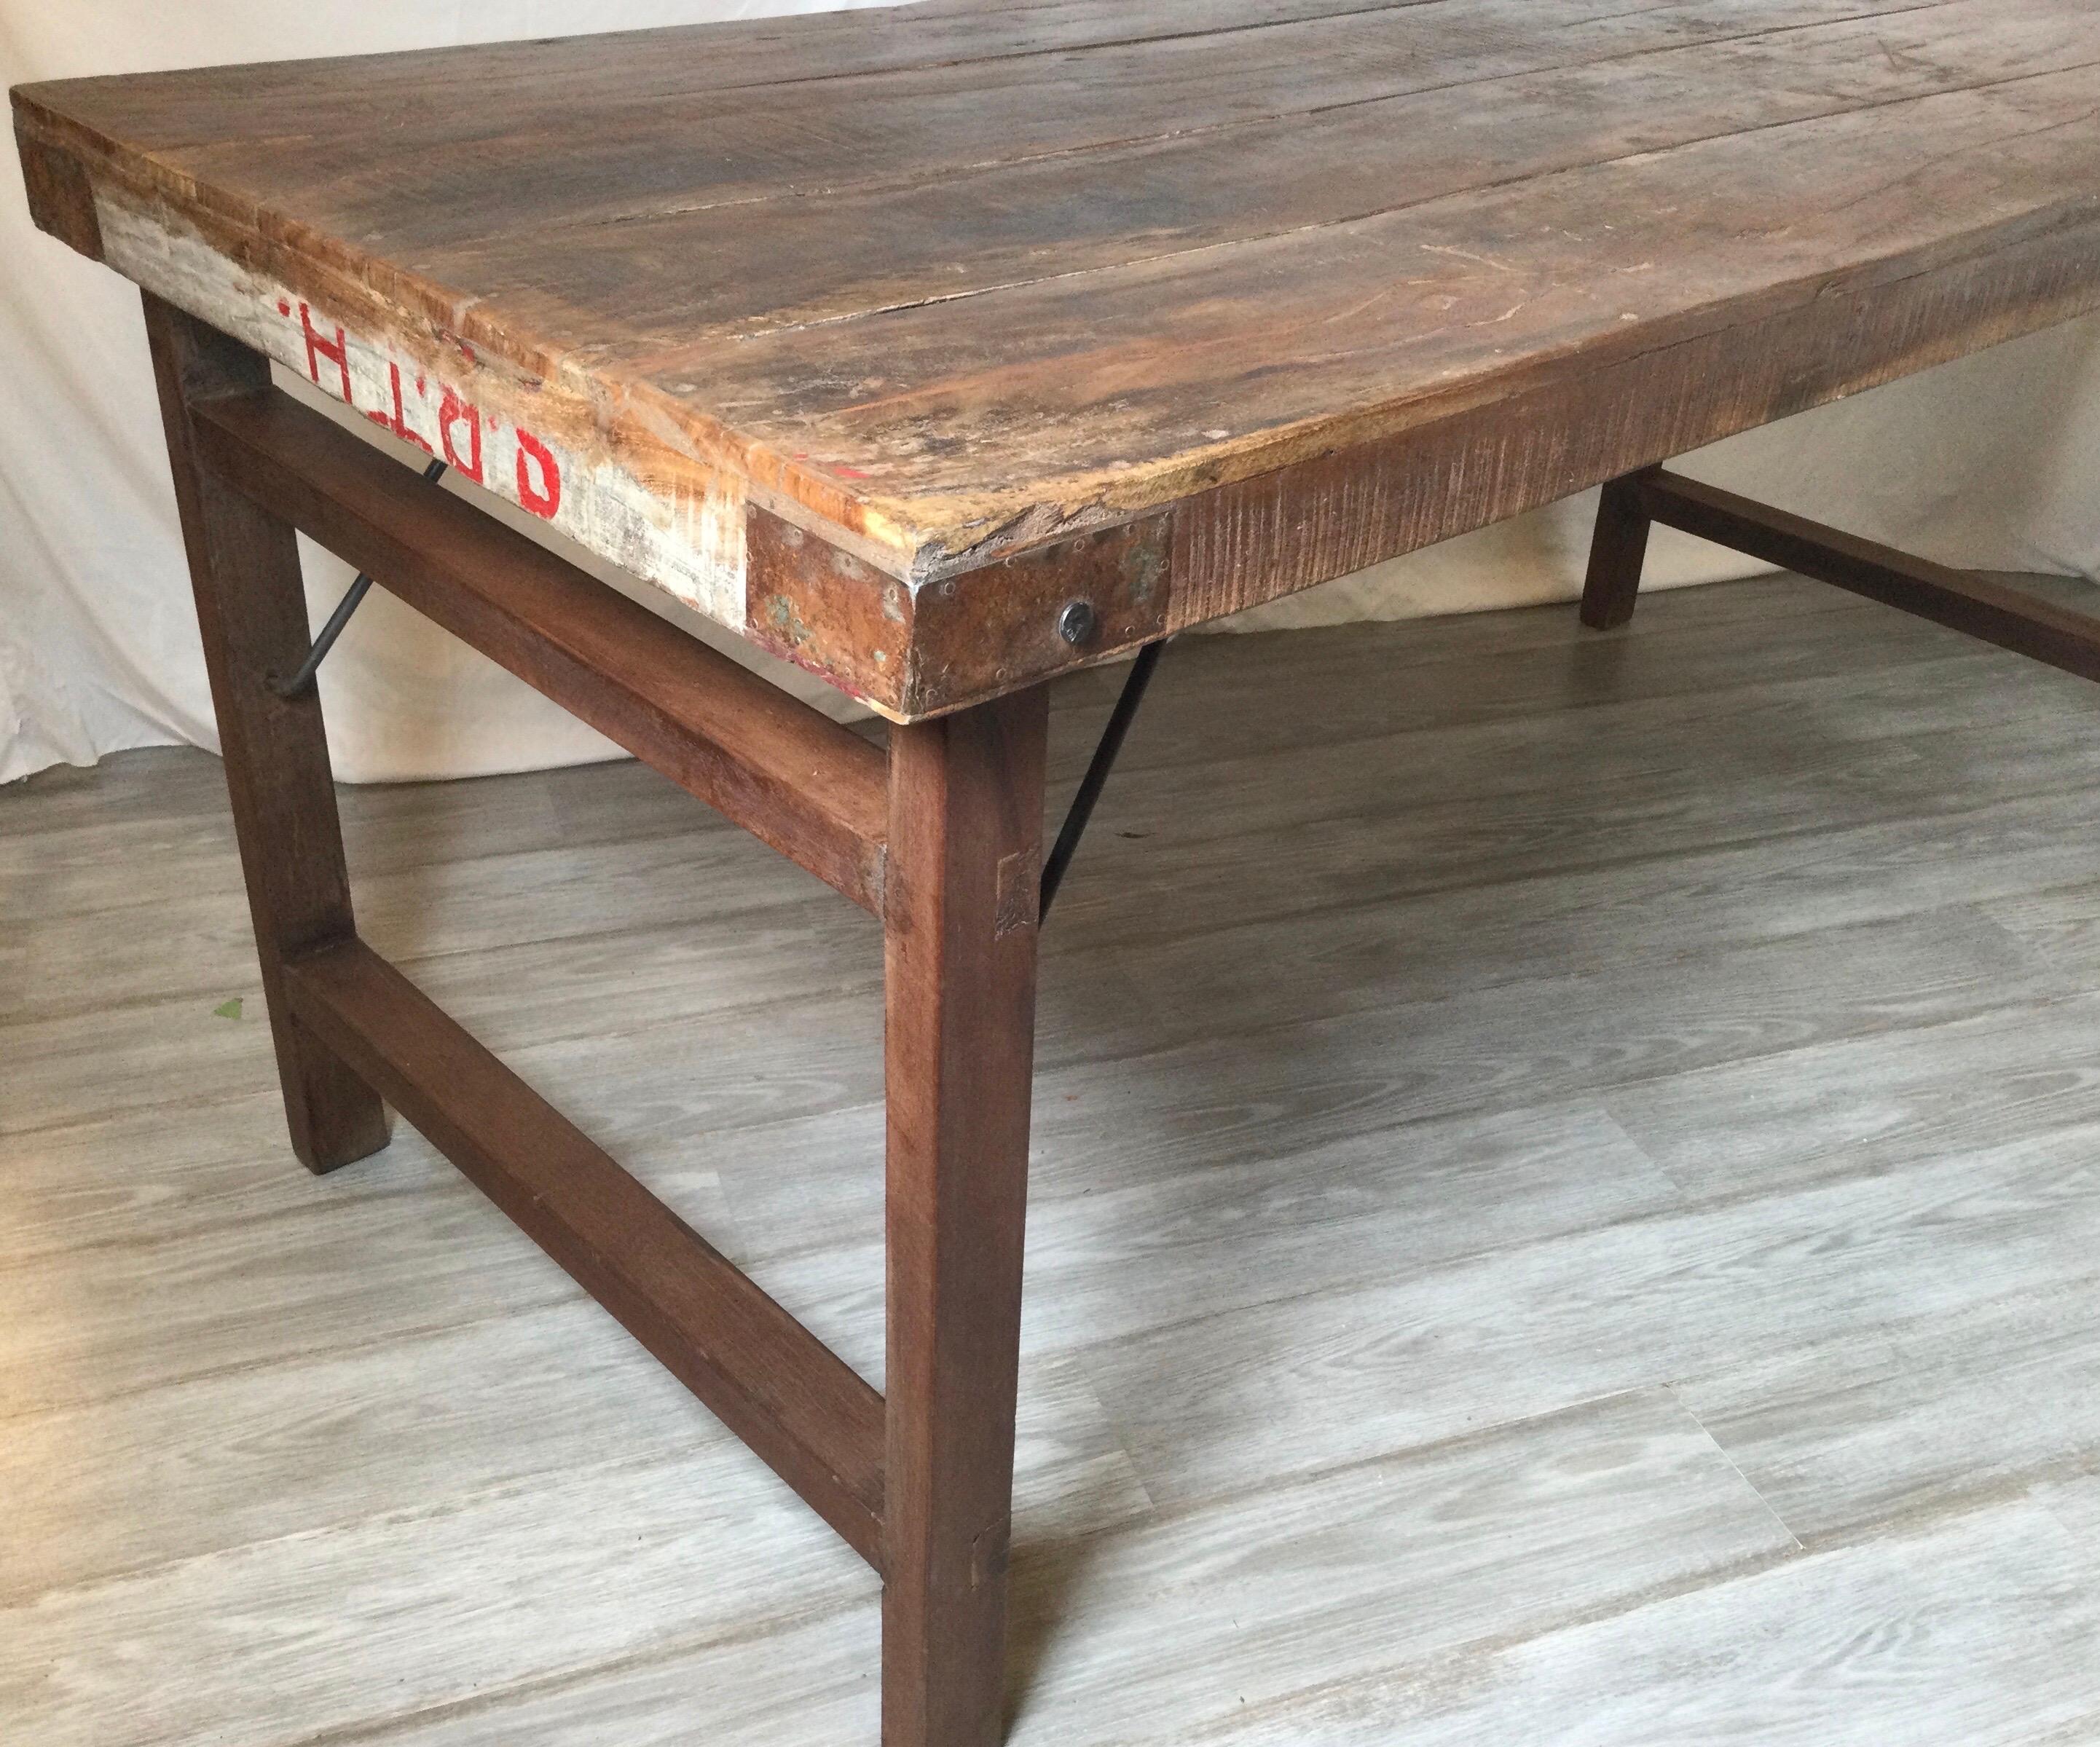 Vintage folding farm table desk. Nicely weathered wood table. Great size and height. Folds flat to about 3